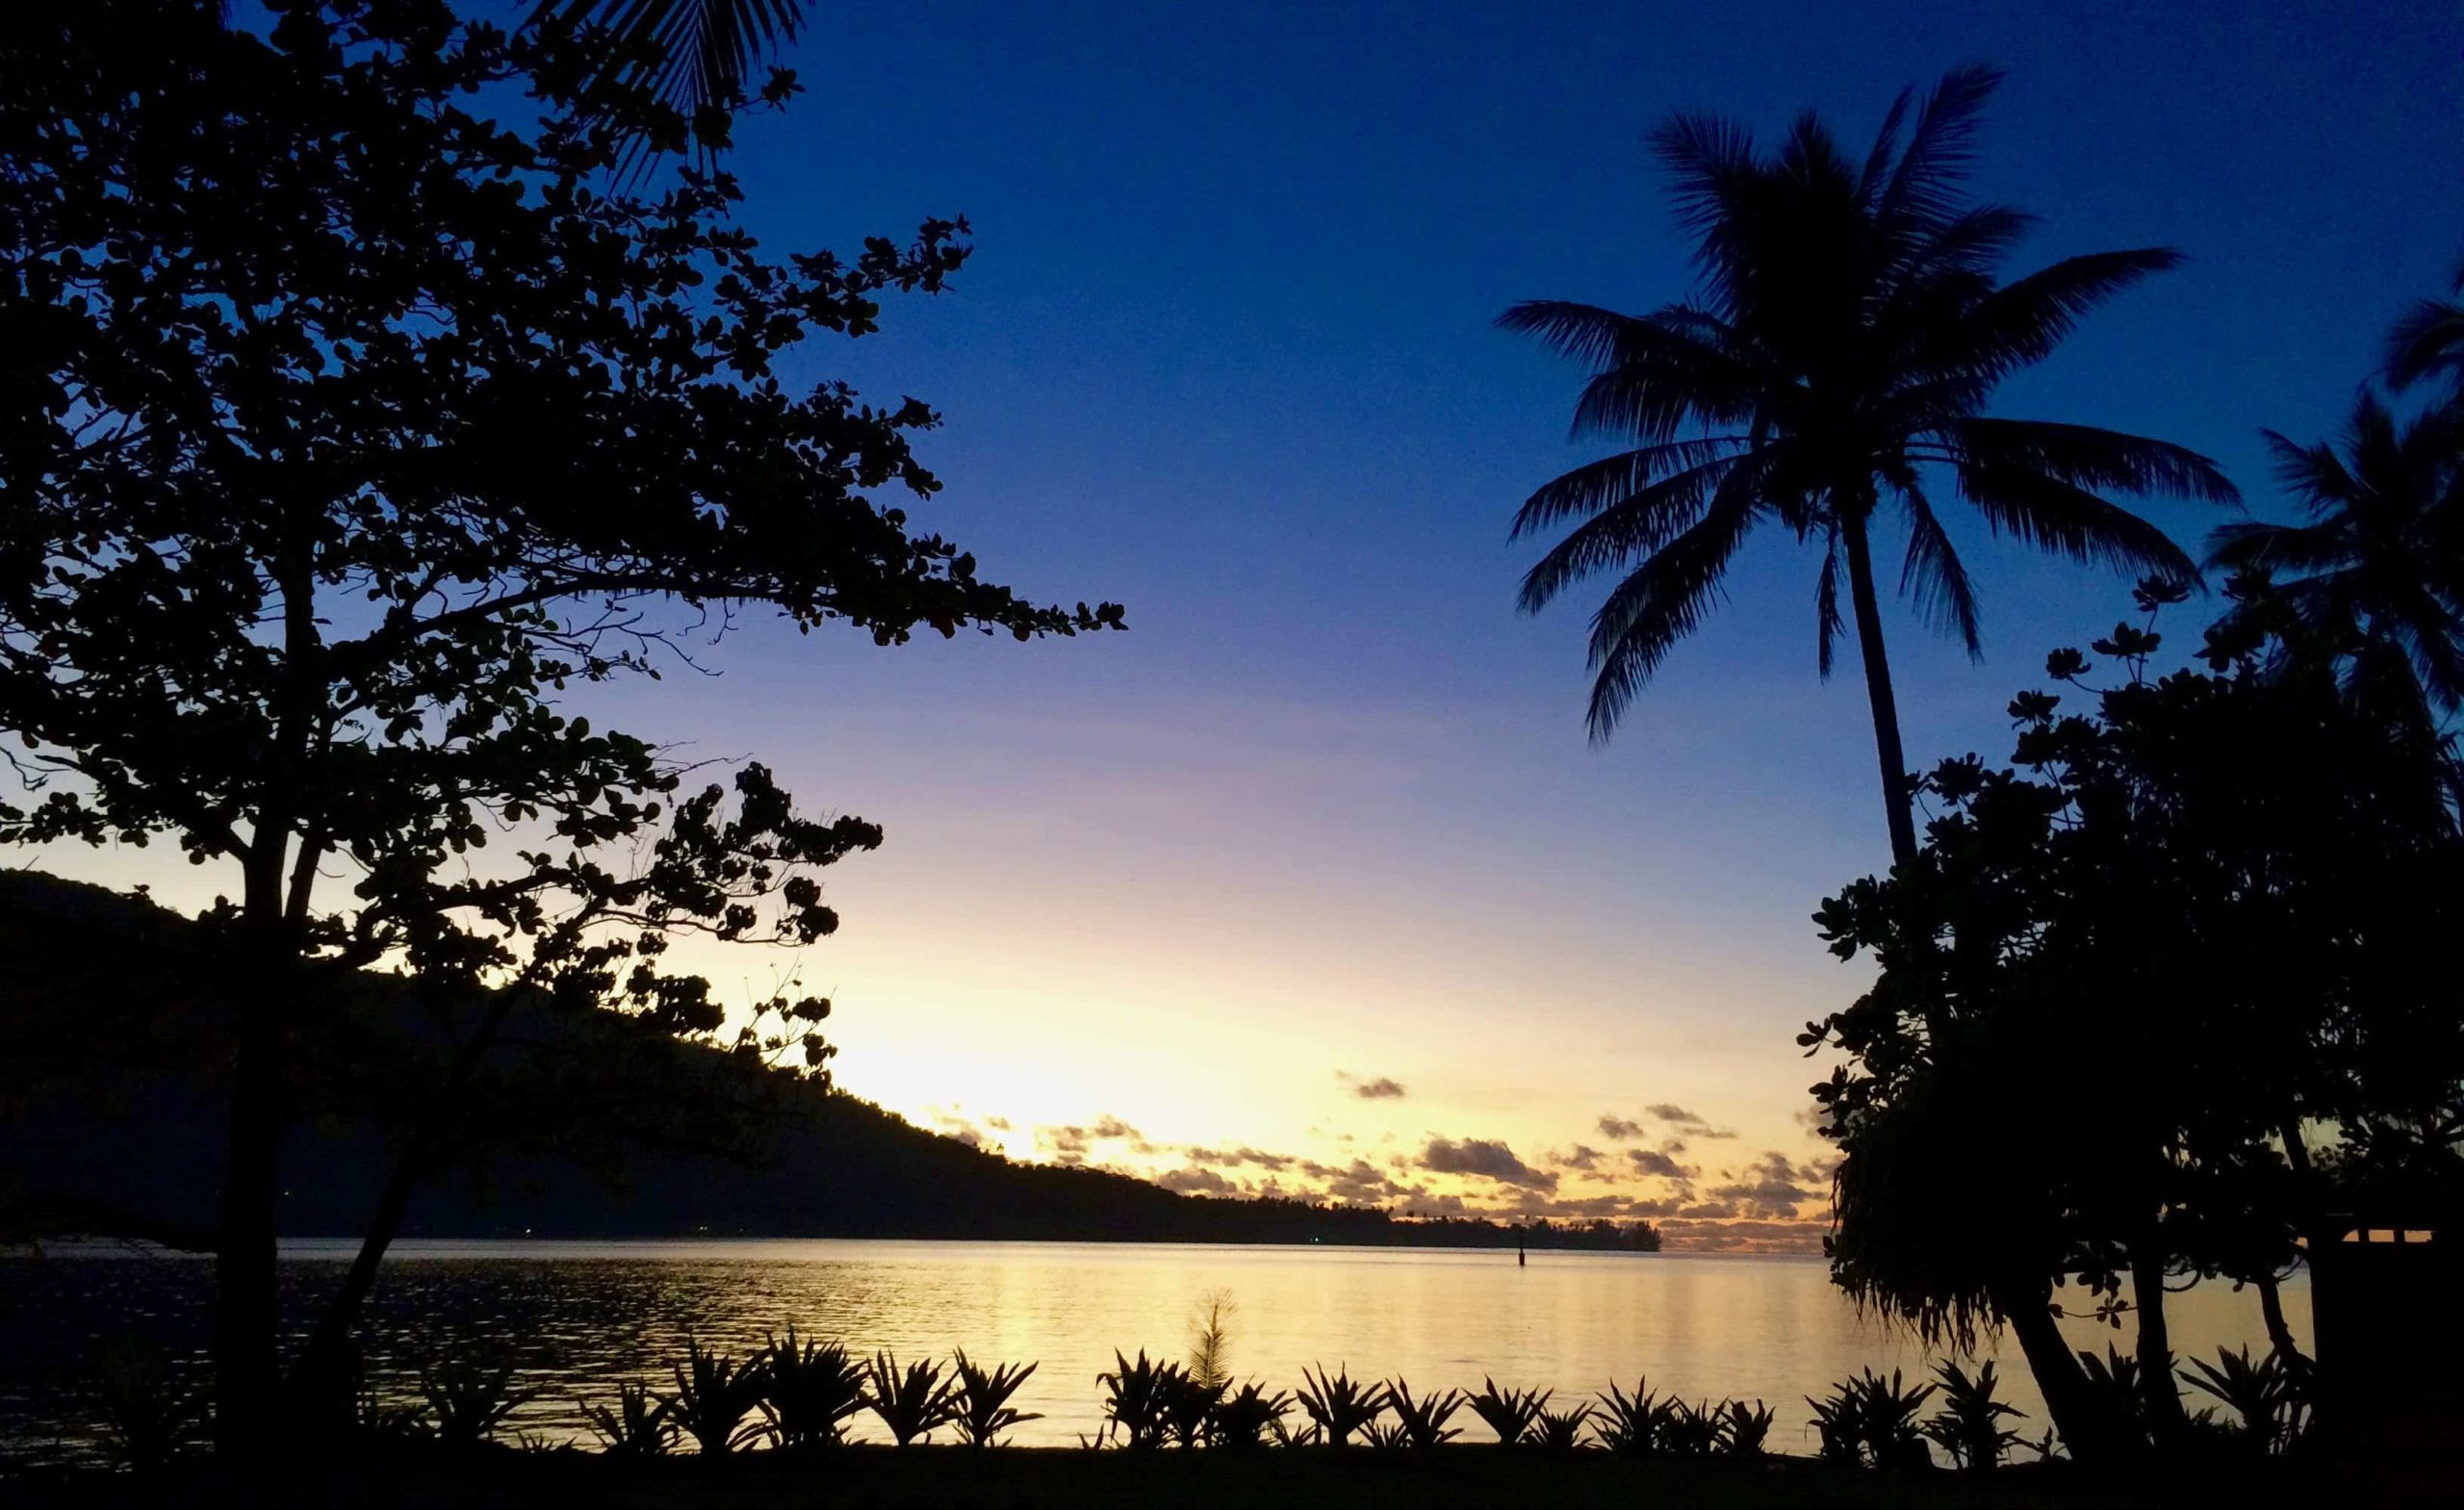 Sunset over the mountains in Moorea, French Polynesia